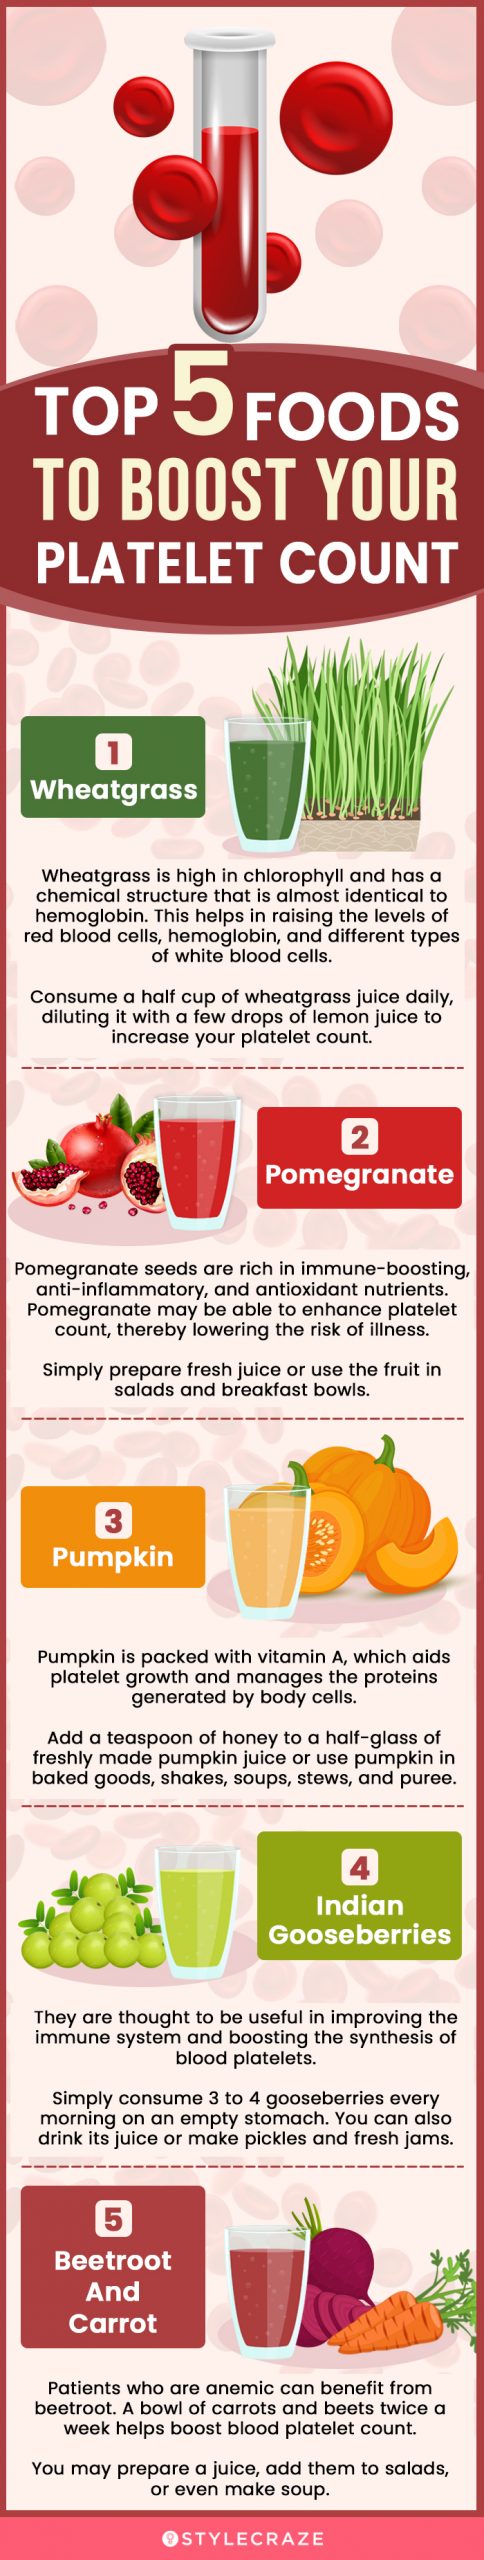 top 5 foods to boost your platelet count (infographic)